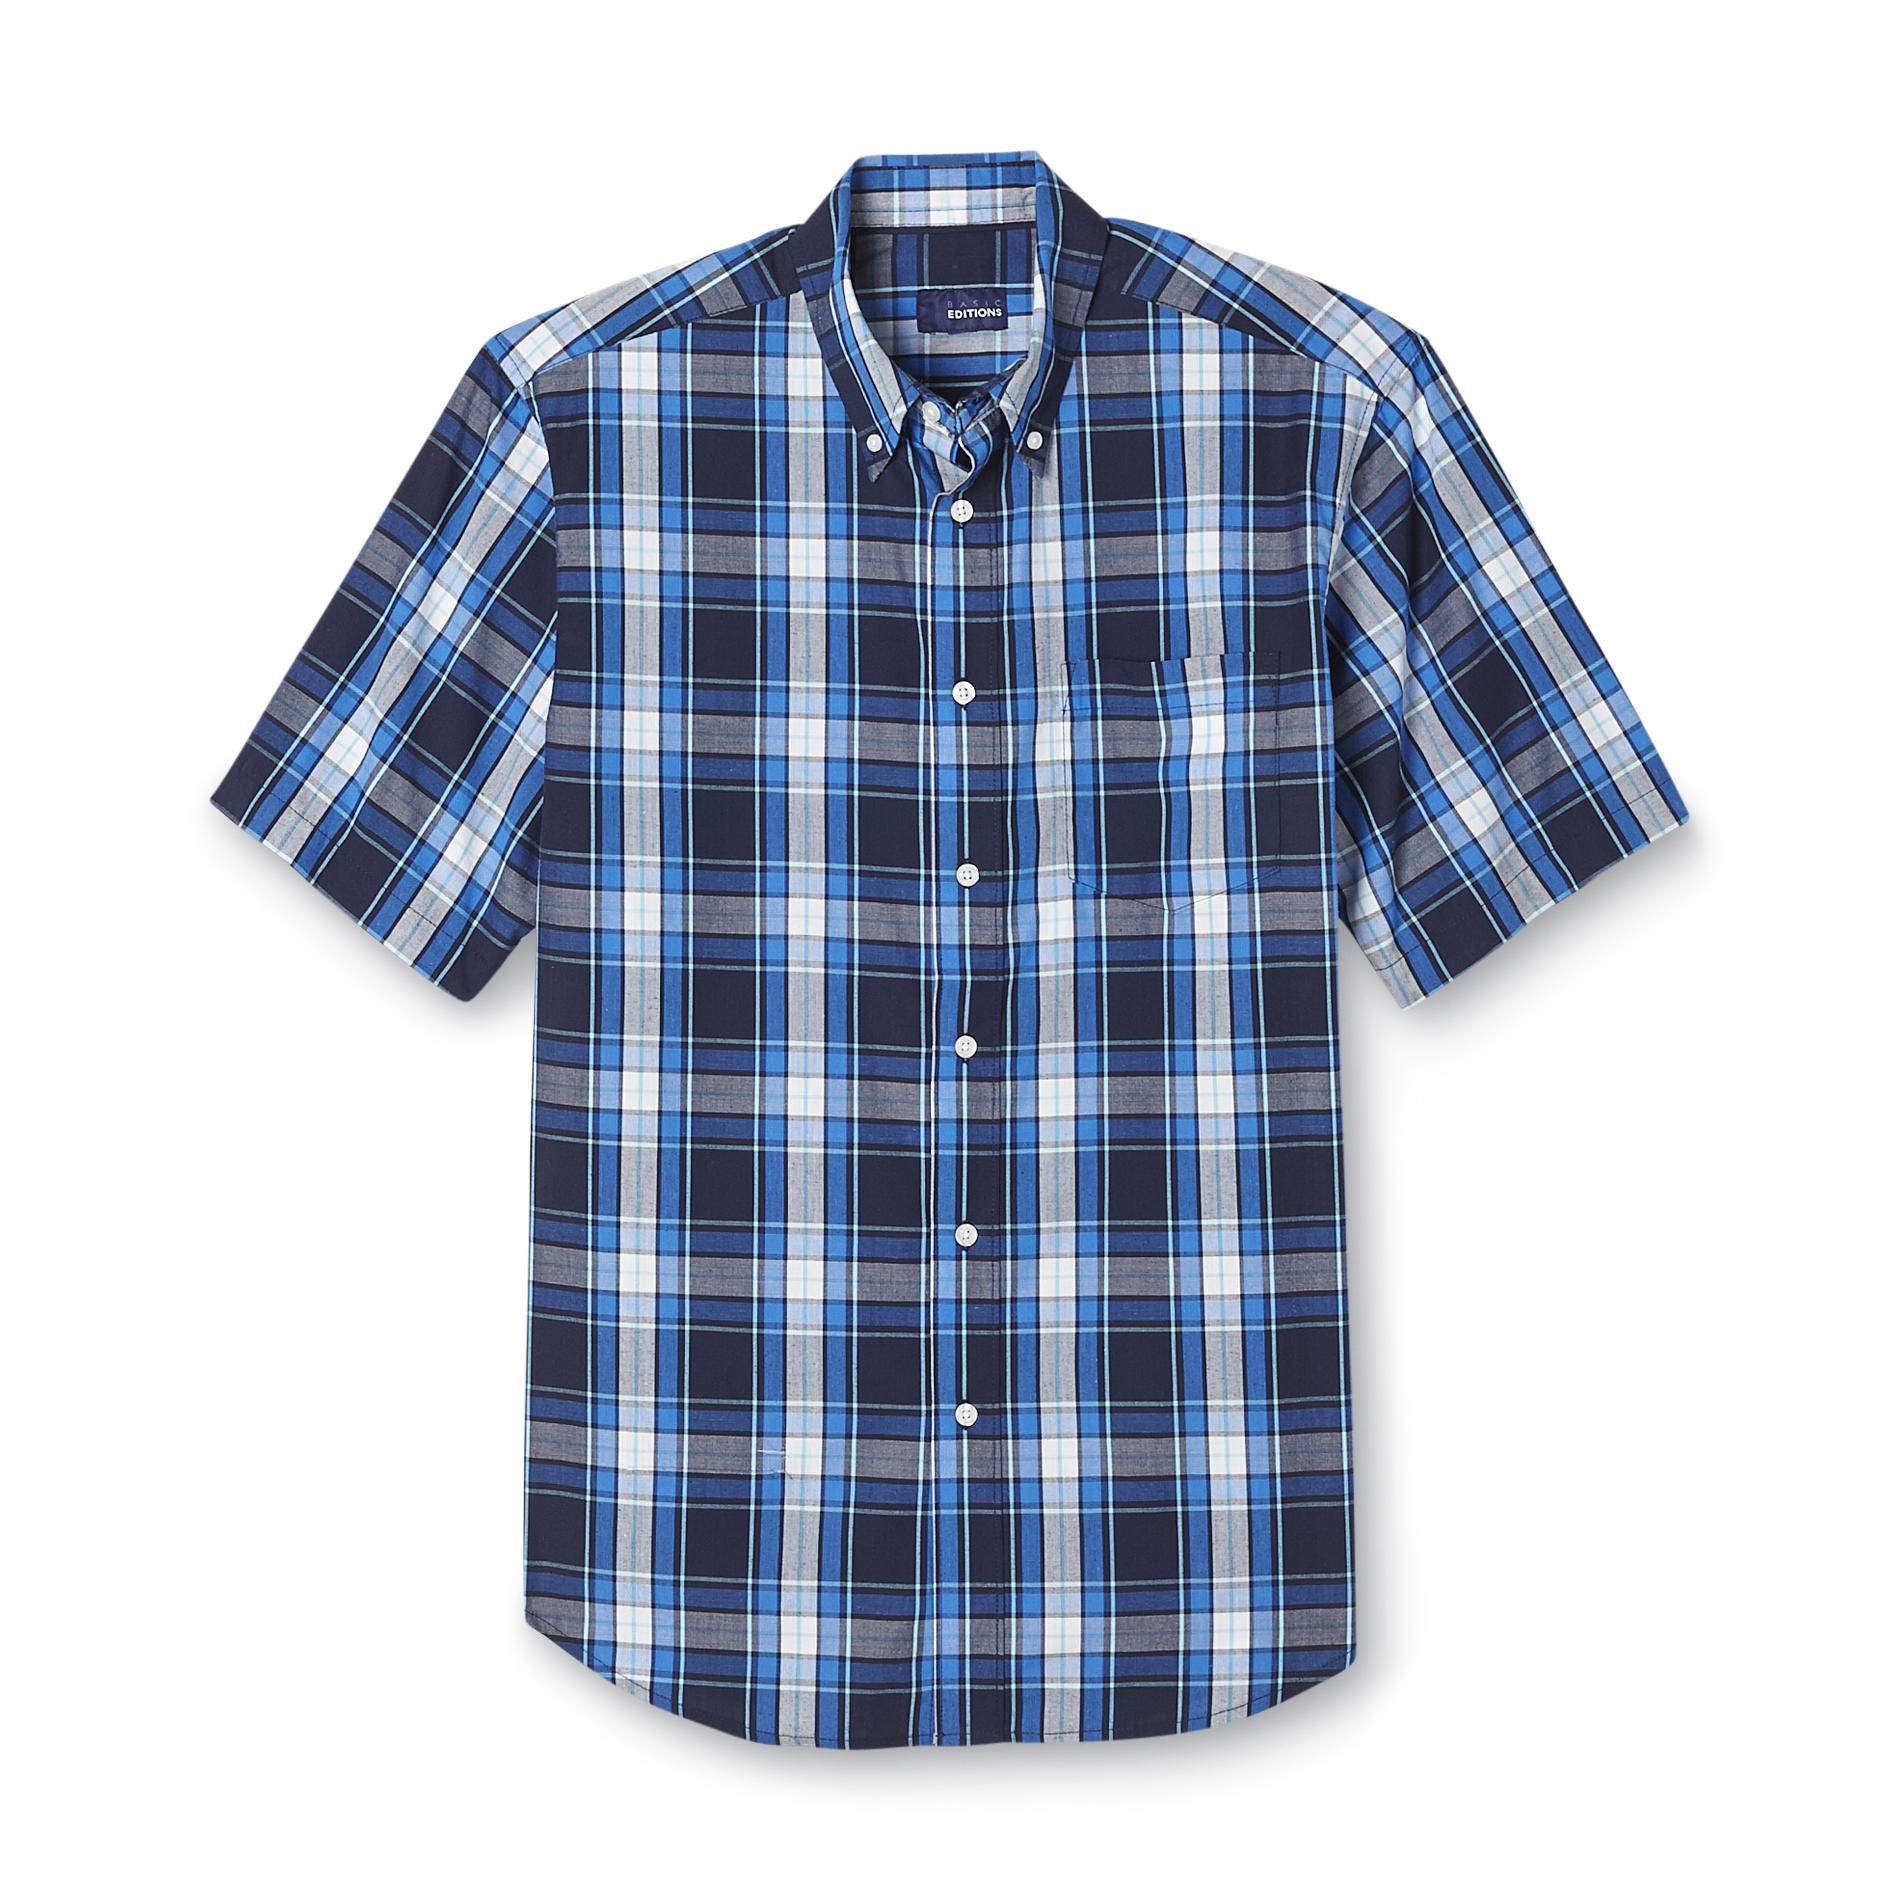 Basic Editions Men's Easy Care Woven Shirt - Plaid